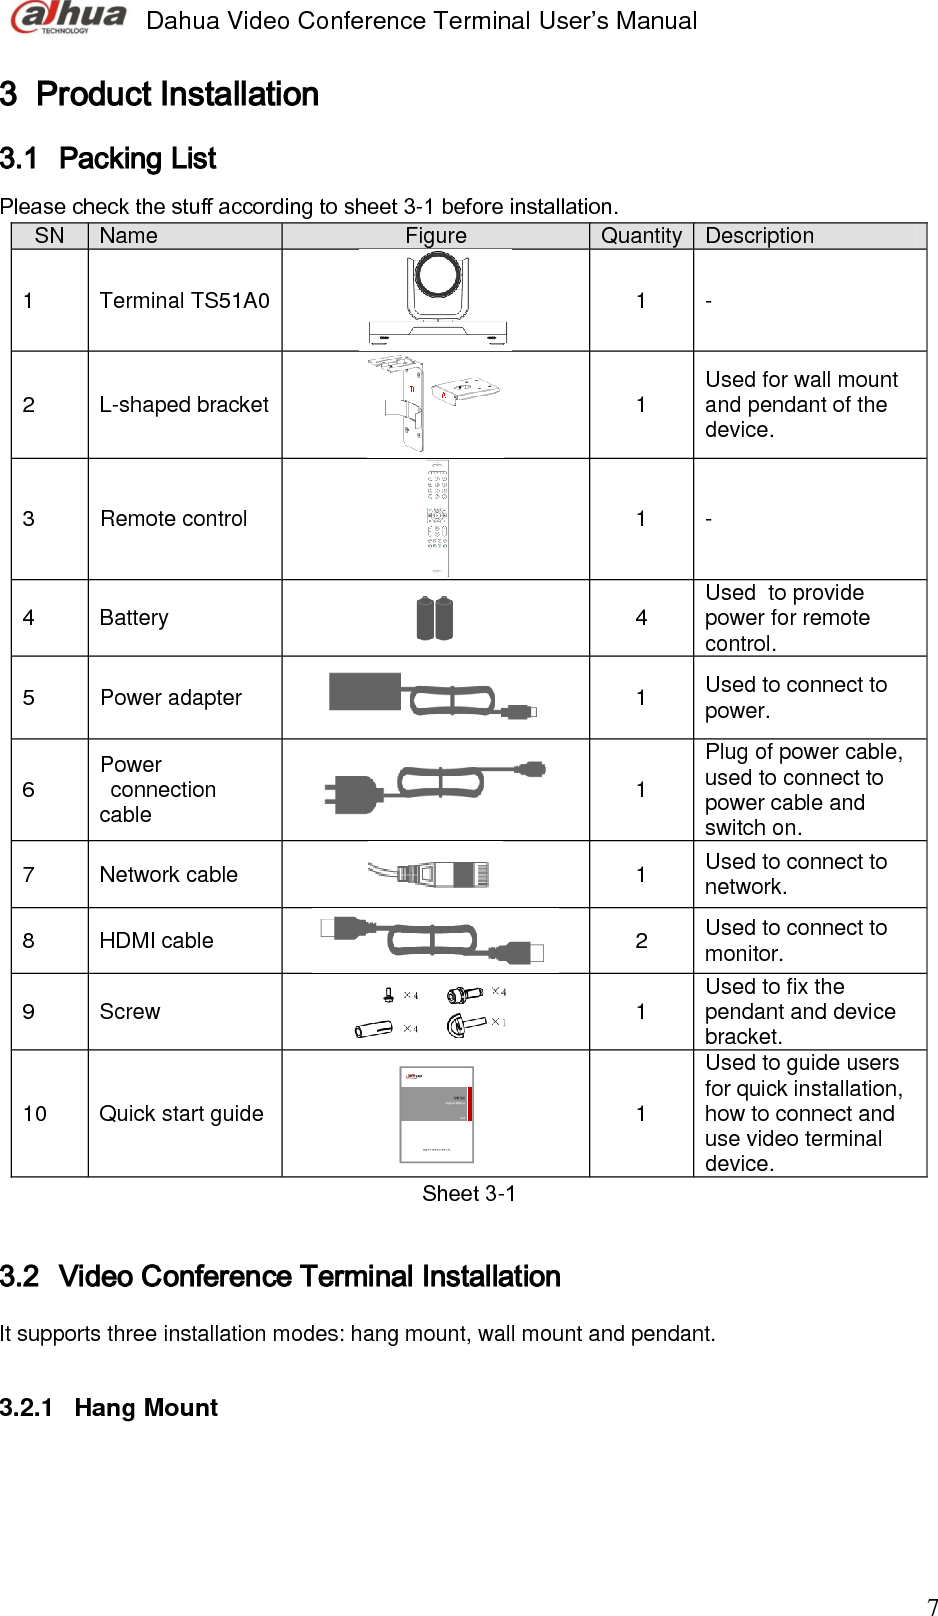  Dahua Video Conference Terminal User’s Manual                                                                              7 3 Product Installation  3.1 Packing List Please check the stuff according to sheet 3-1 before installation.  SN Name Figure Quantity Description 1 Terminal TS51A0  1 - 2 L-shaped bracket  1 Used for wall mount and pendant of the device.   3 Remote control  1 - 4 Battery  4 Used  to provide power for remote control. 5 Power adapter  1 Used to connect to power.  6 Power connection cable    1 Plug of power cable, used to connect to power cable and switch on. 7 Network cable  1 Used to connect to network. 8 HDMI cable  2 Used to connect to monitor. 9 Screw  1 Used to fix the pendant and device bracket.  10 Quick start guide  1 Used to guide users for quick installation, how to connect and use video terminal device. Sheet 3-1  3.2 Video Conference Terminal Installation It supports three installation modes: hang mount, wall mount and pendant.   3.2.1  Hang Mount 